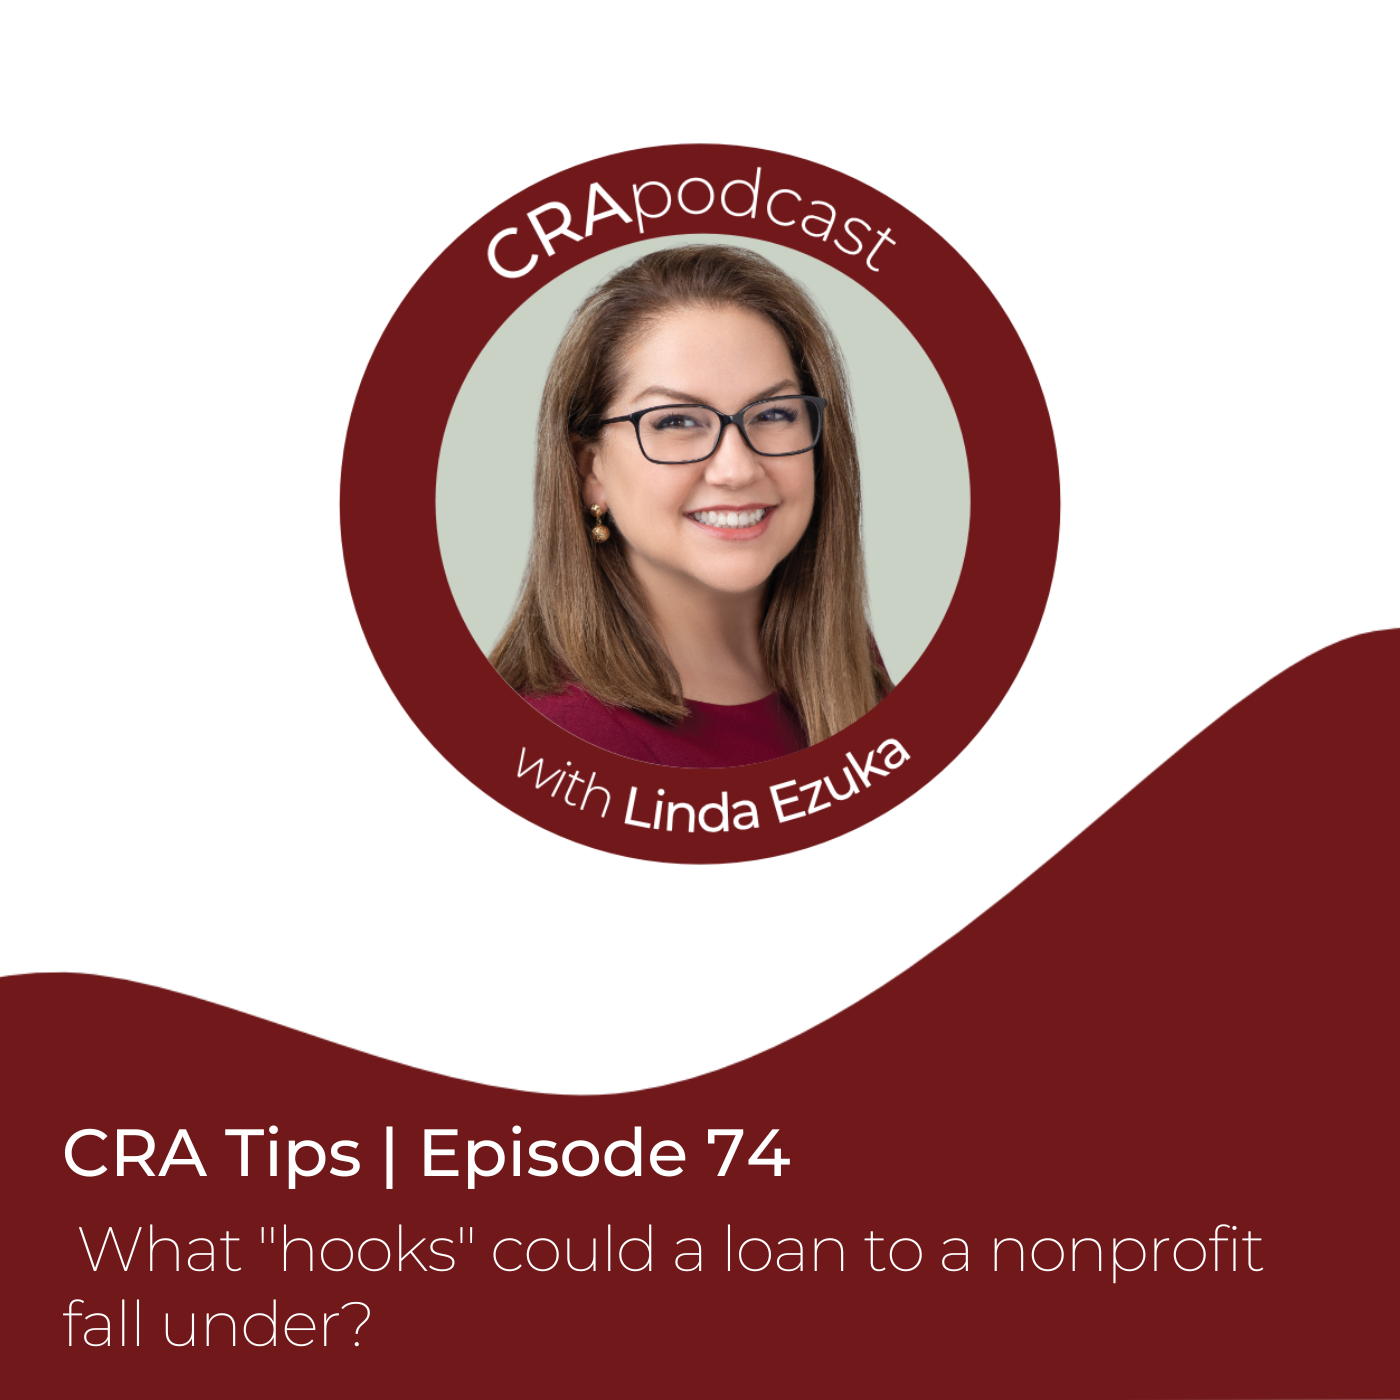 Episode 74: CRA Tips: What “hooks” could a loan to a nonprofit fall under?